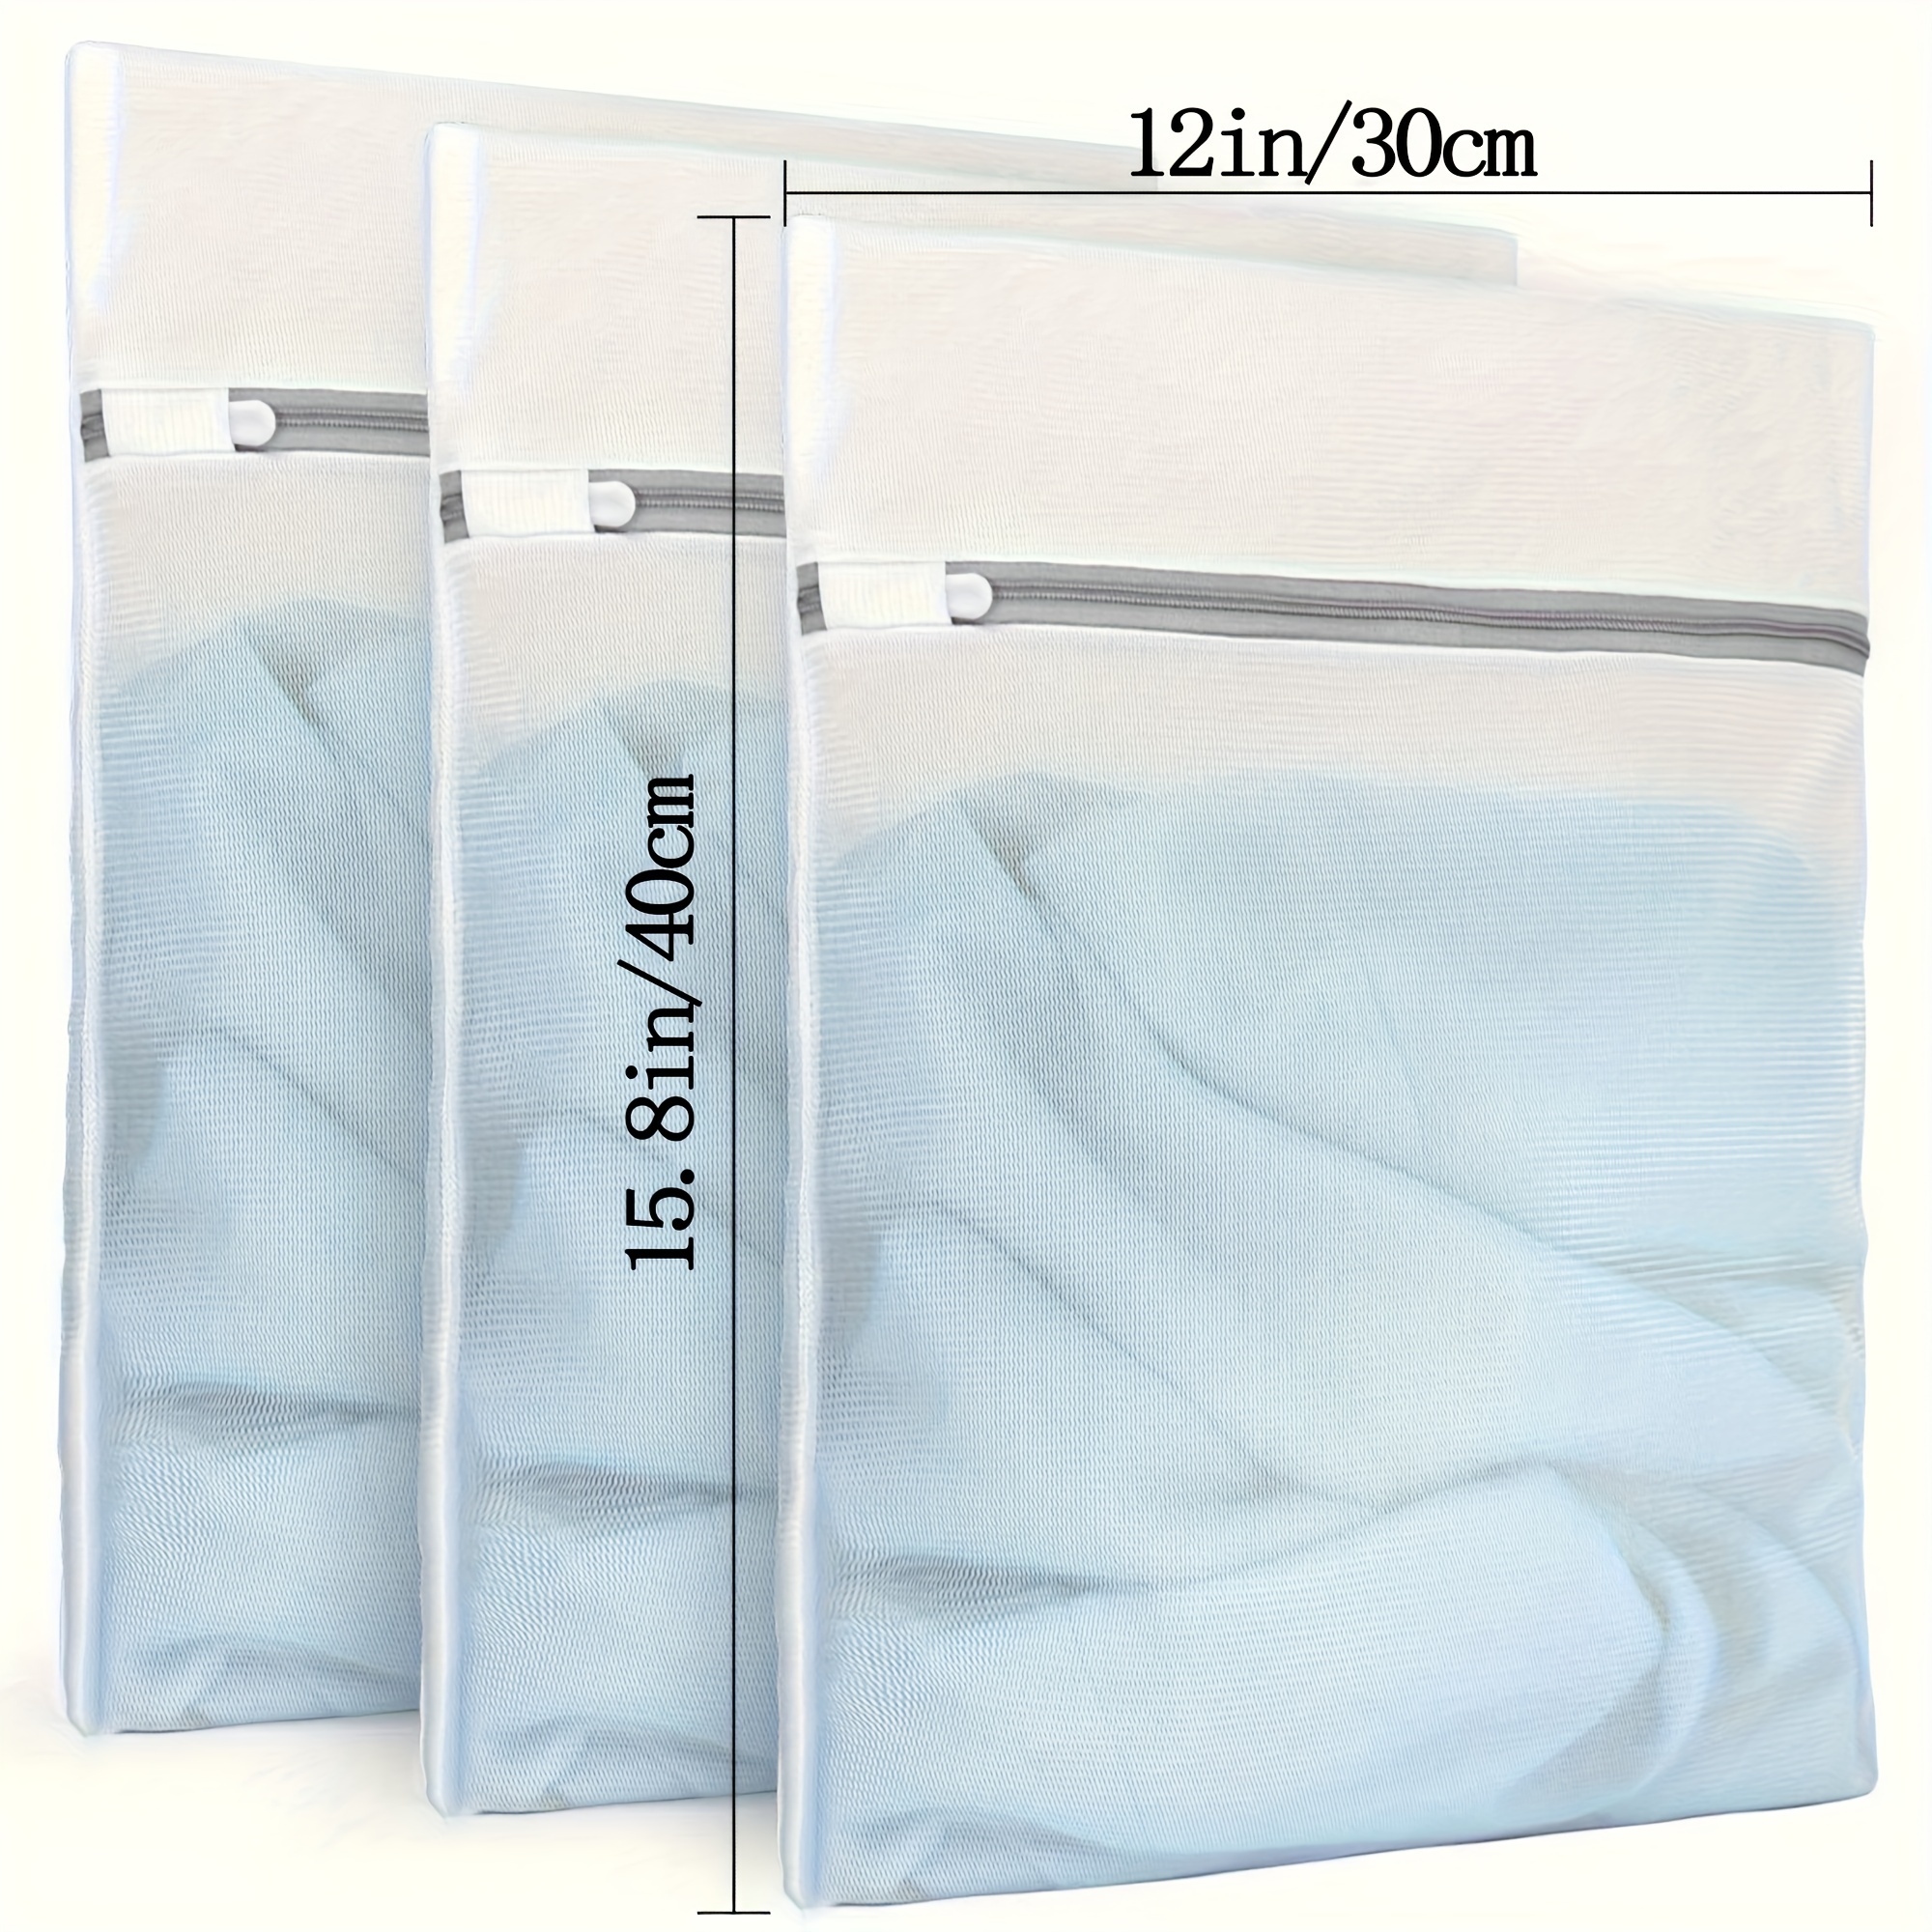 3 Pack Mesh Laundry Bag, Laundry Bags for Delicates, Delicates Bag